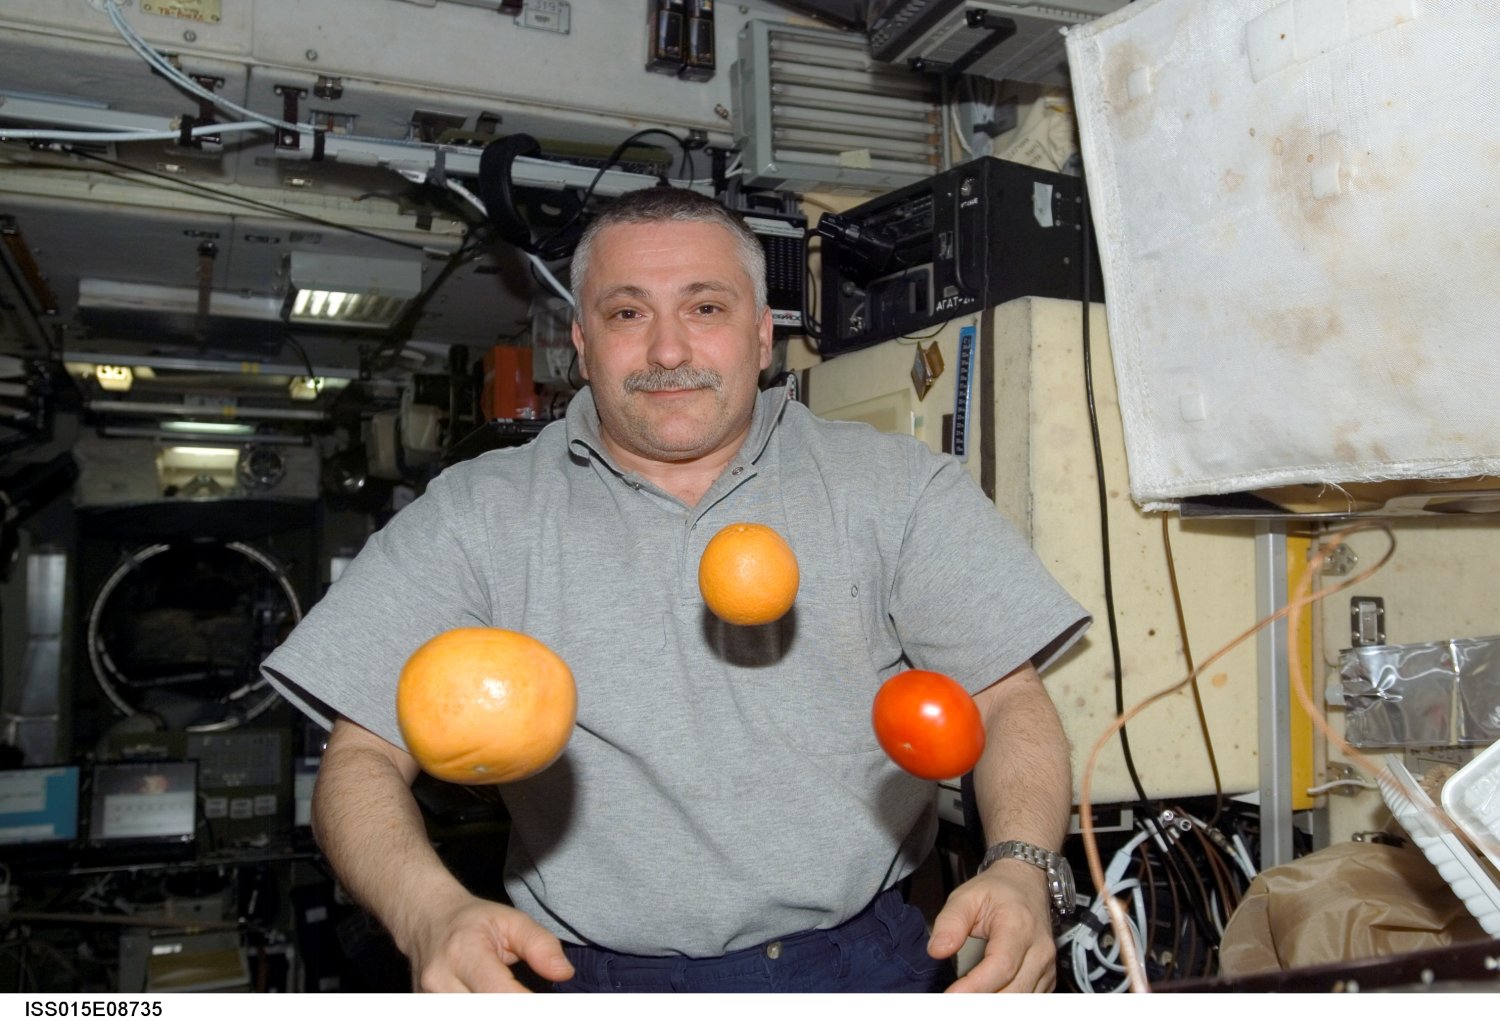 On the ISS